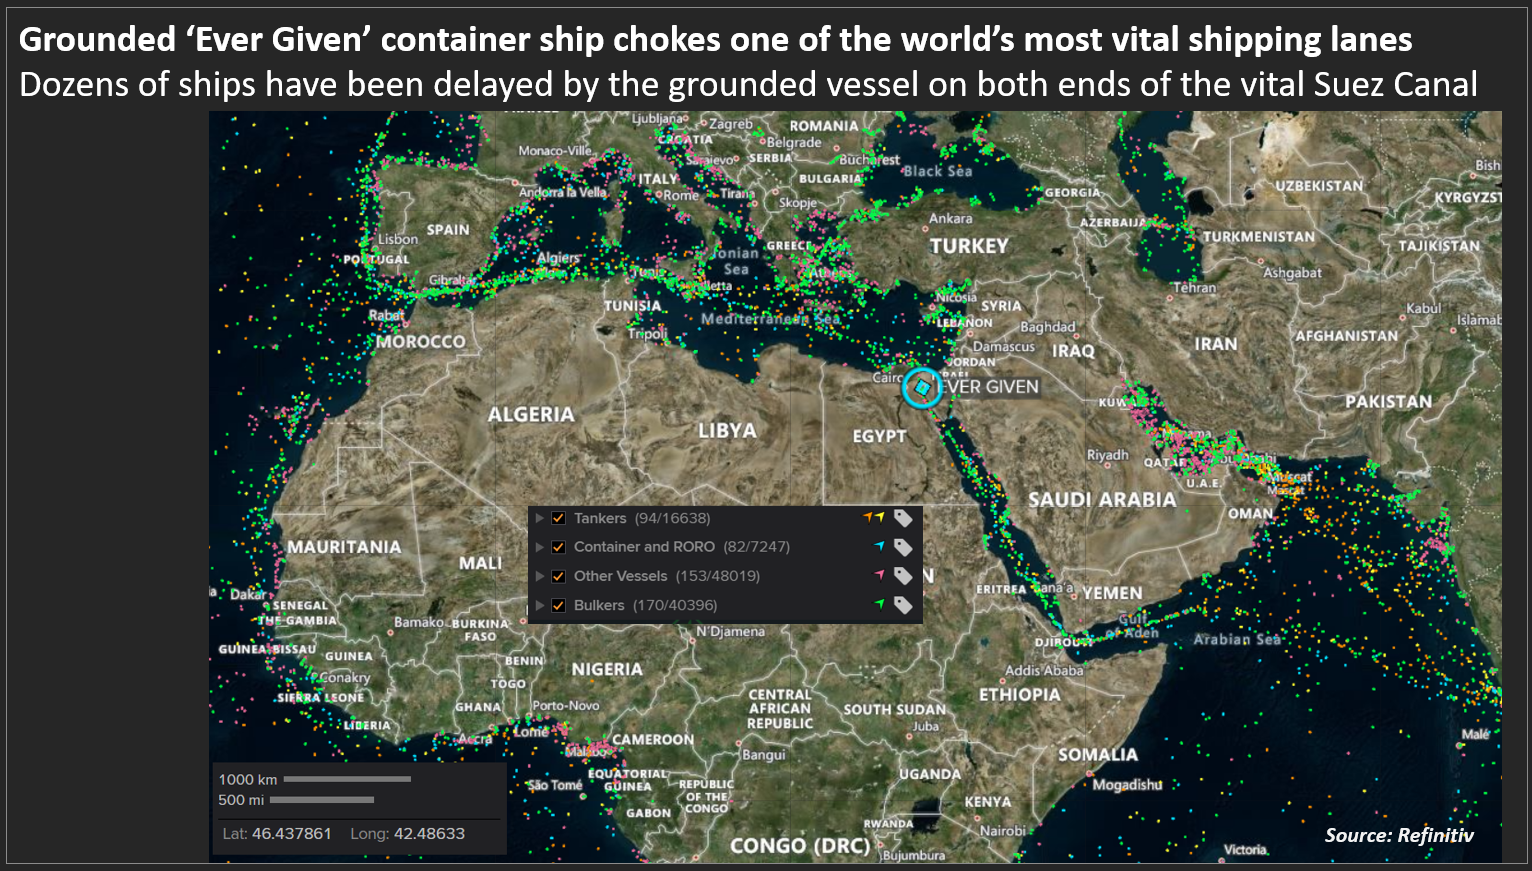 Grounded ‘Ever Given’ container ship chokes one of the world’s most vital shipping lanes. Graphic: Reuters